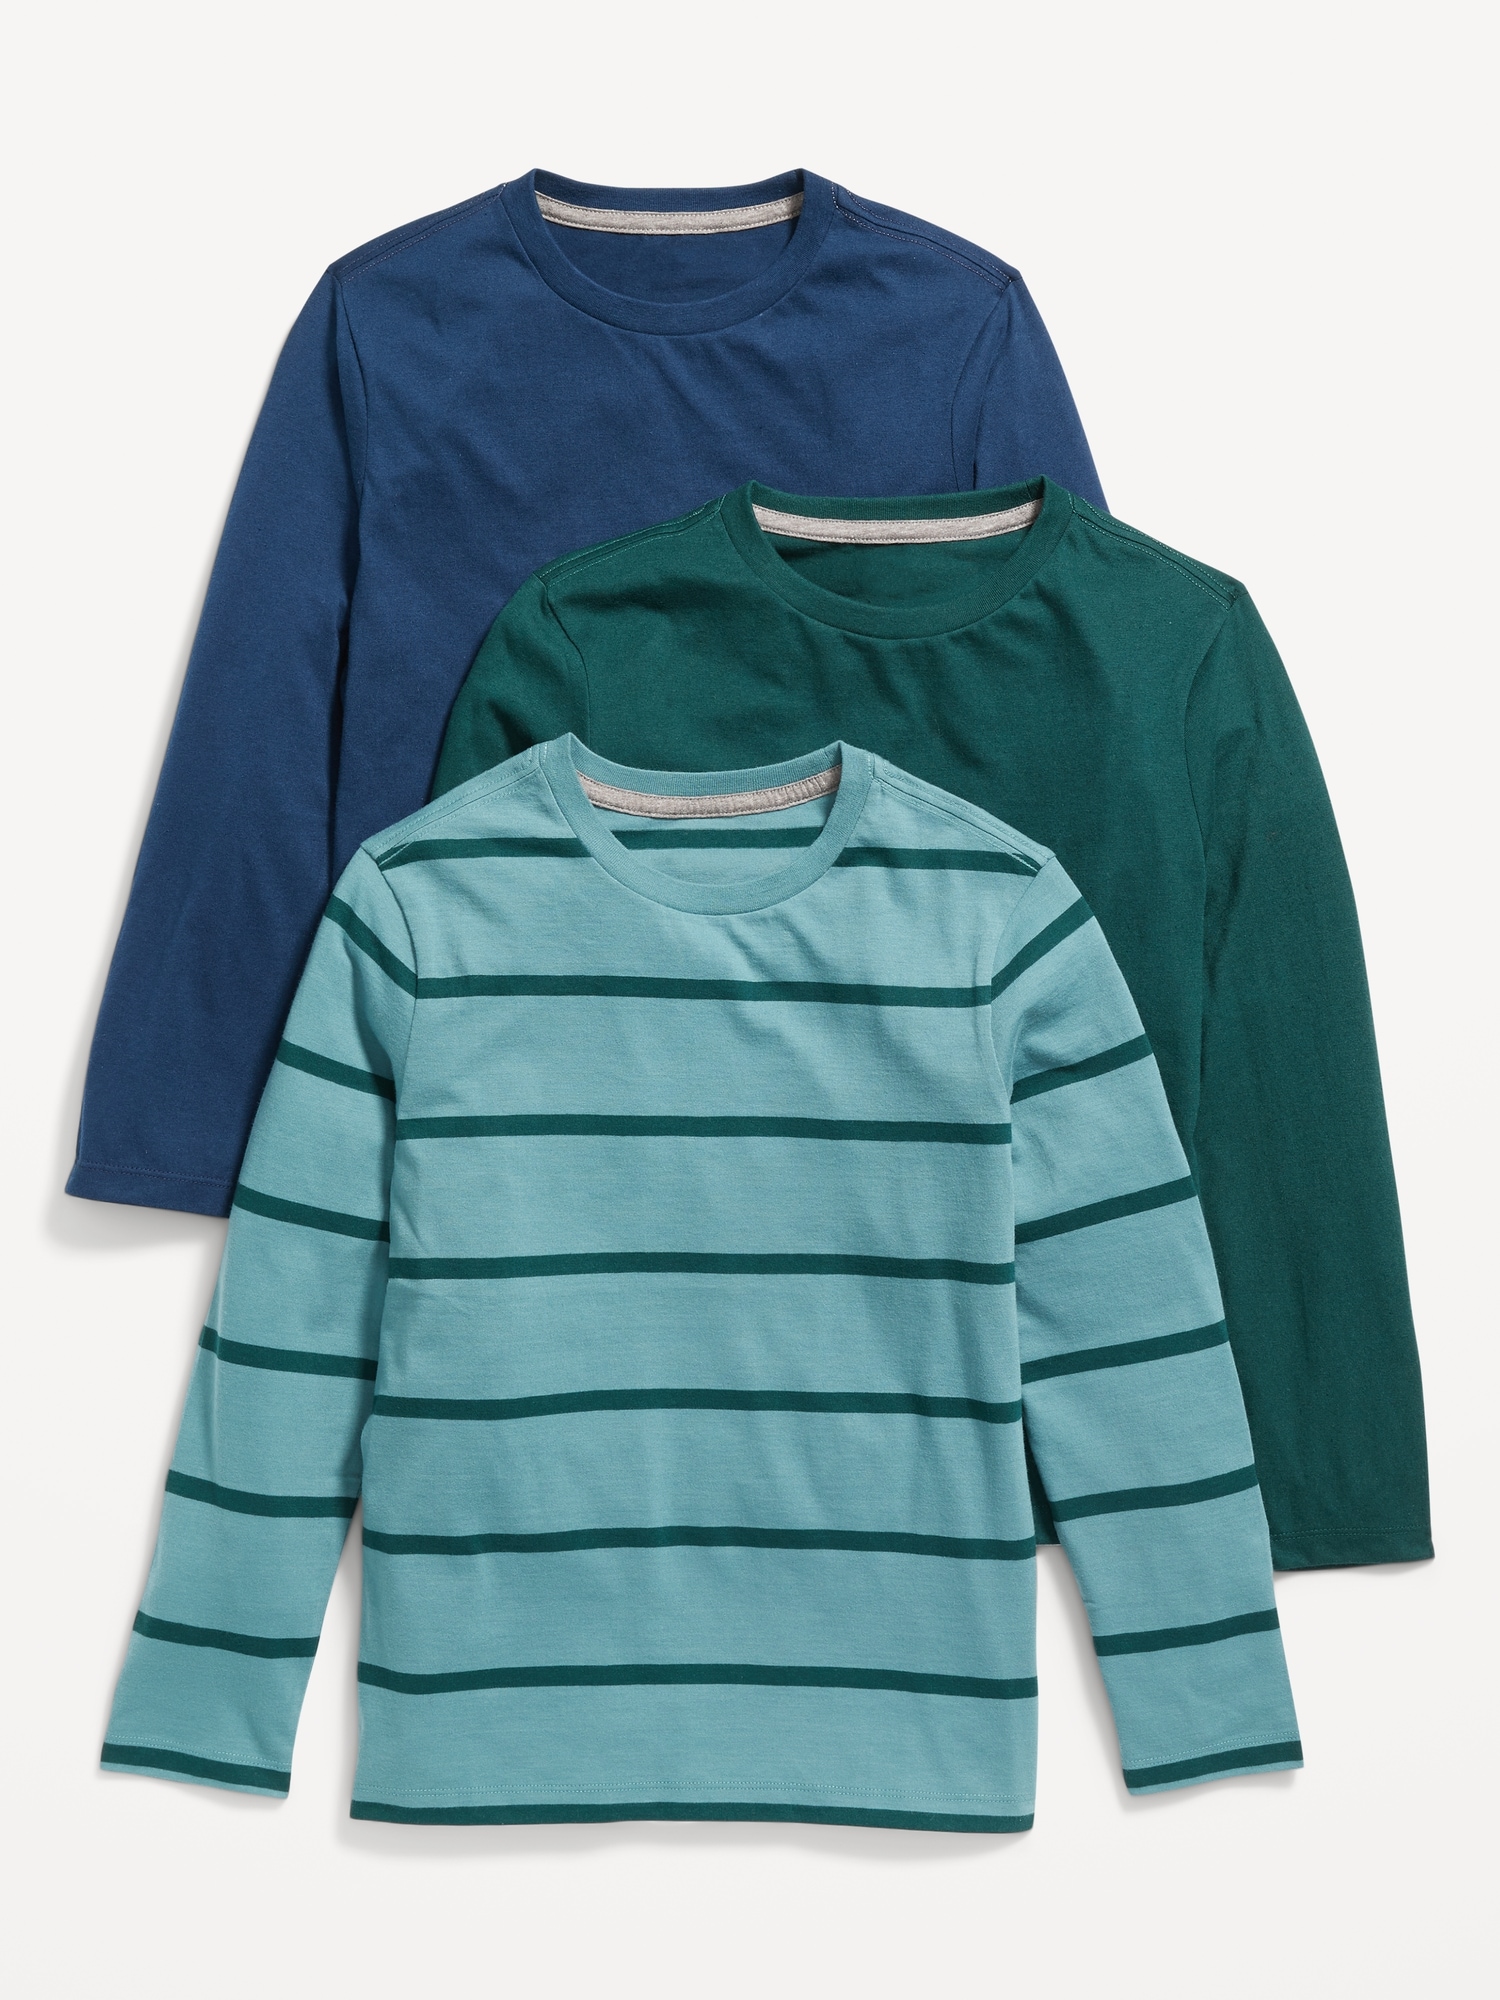 Simple Joys by Carter's Baby Boy's 3-Pack Thermal Long Sleeve Shirts Pack of 3 